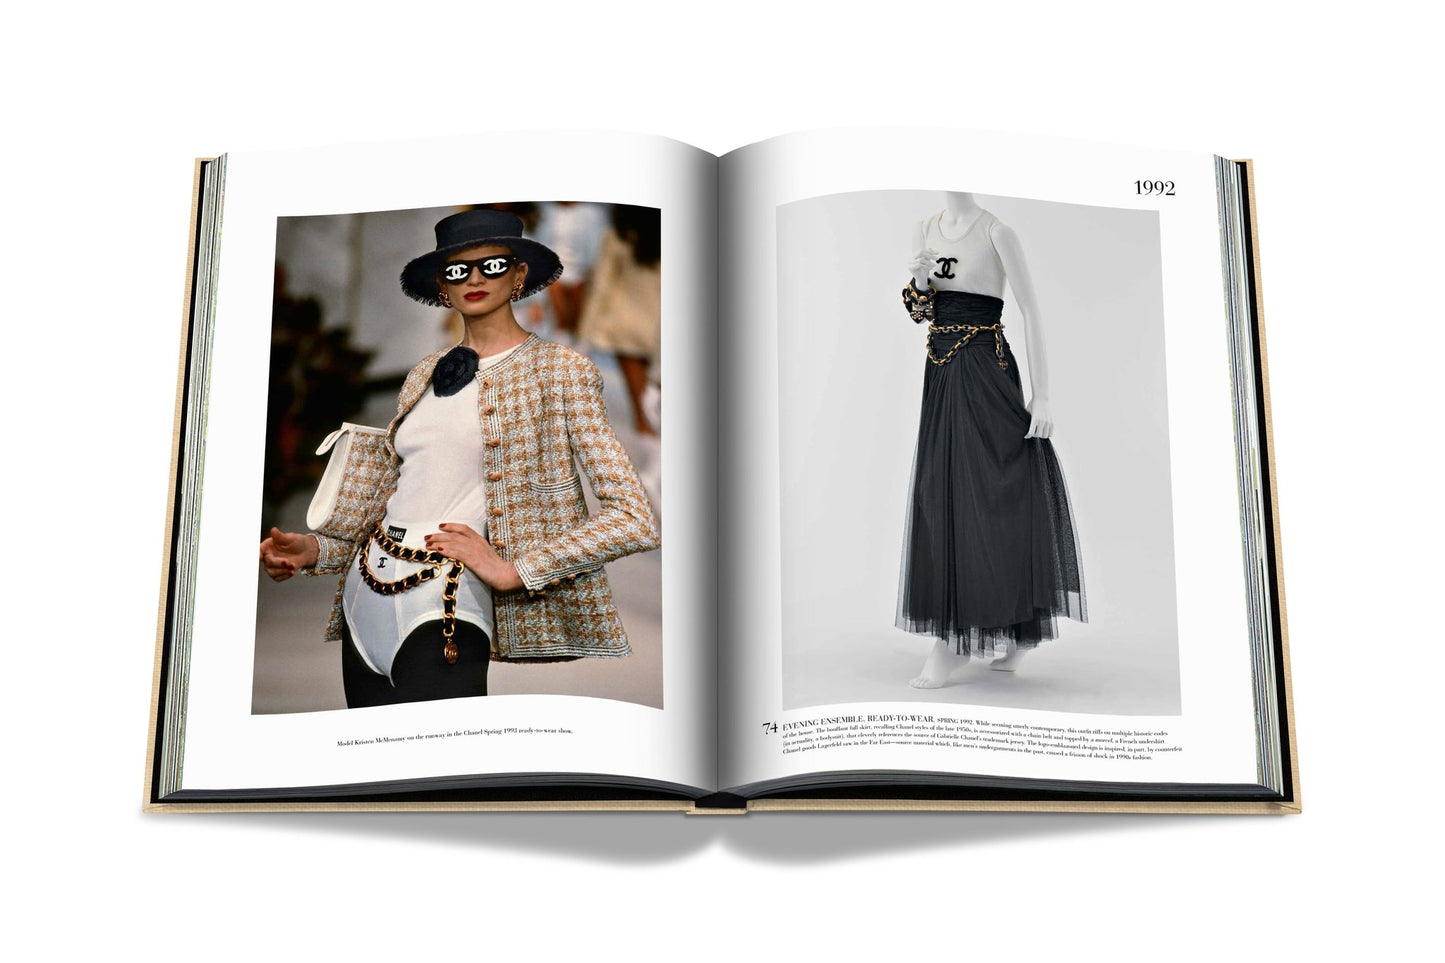 Livre Chanel: Impossible collection